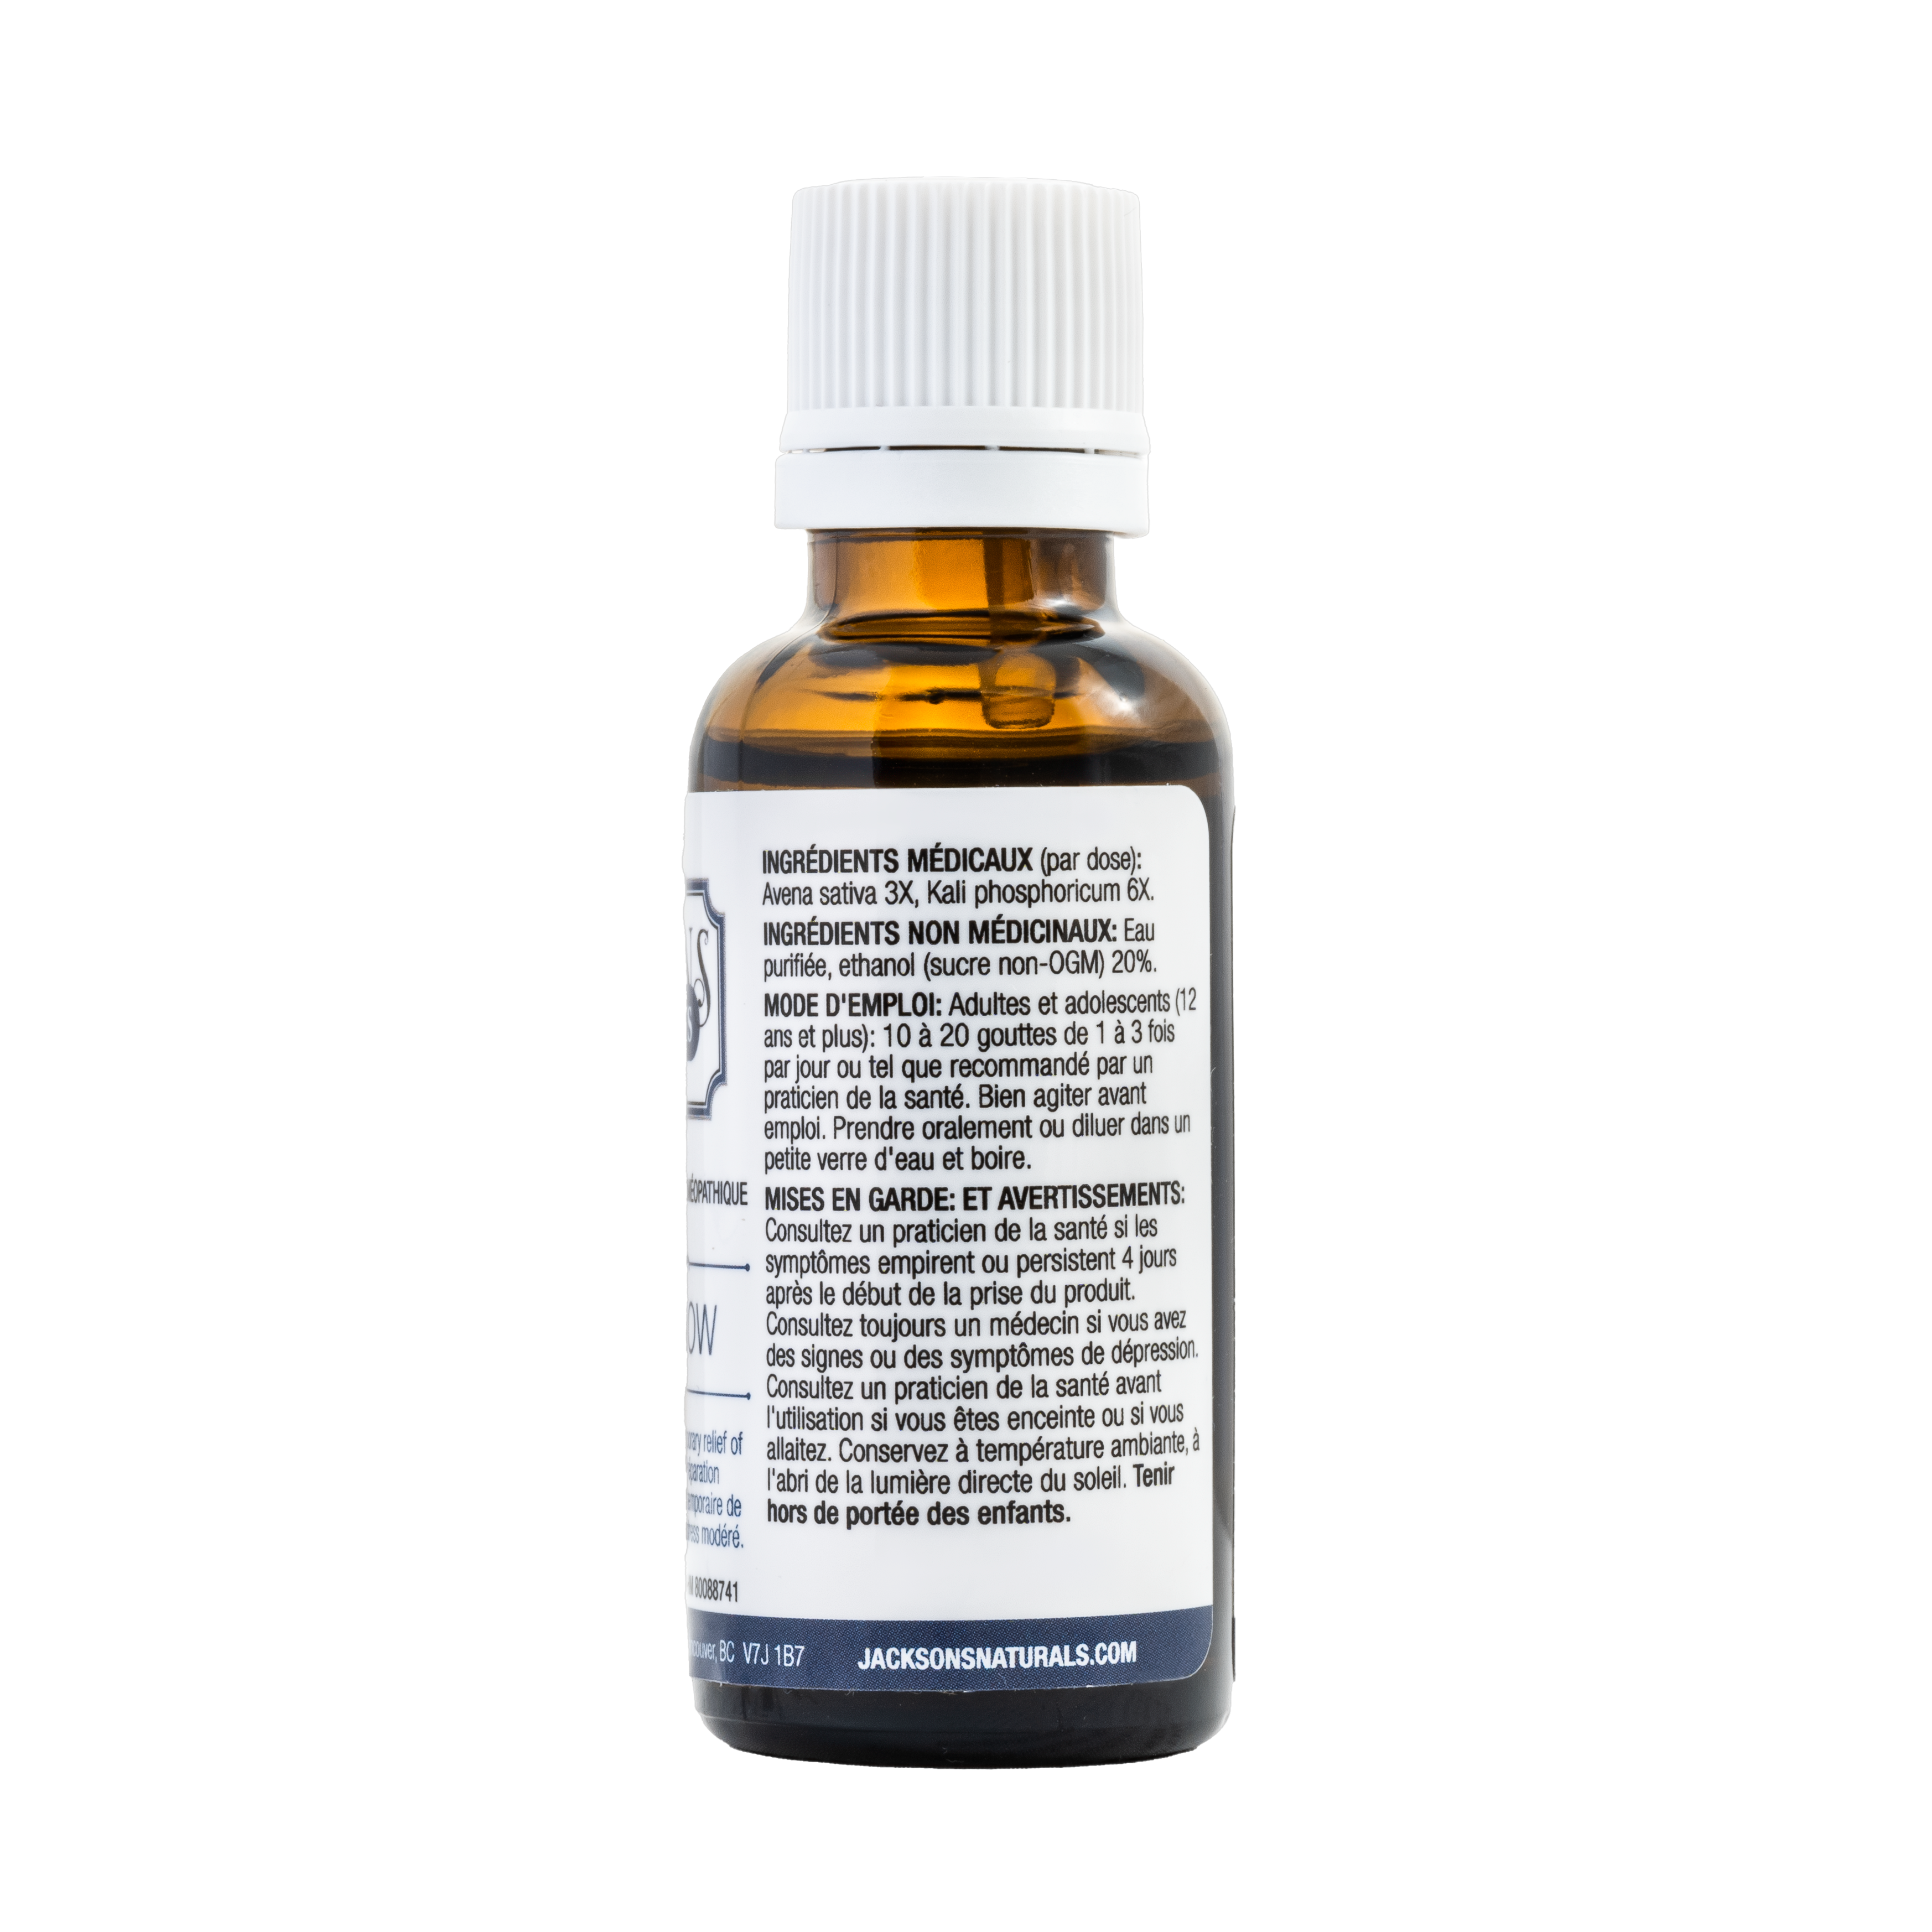 Serenity NOW cell salt combination drops for Stress and Sleep - Certified Vegan Homeopathic Cell Salt Preparation With Kali phos 6x